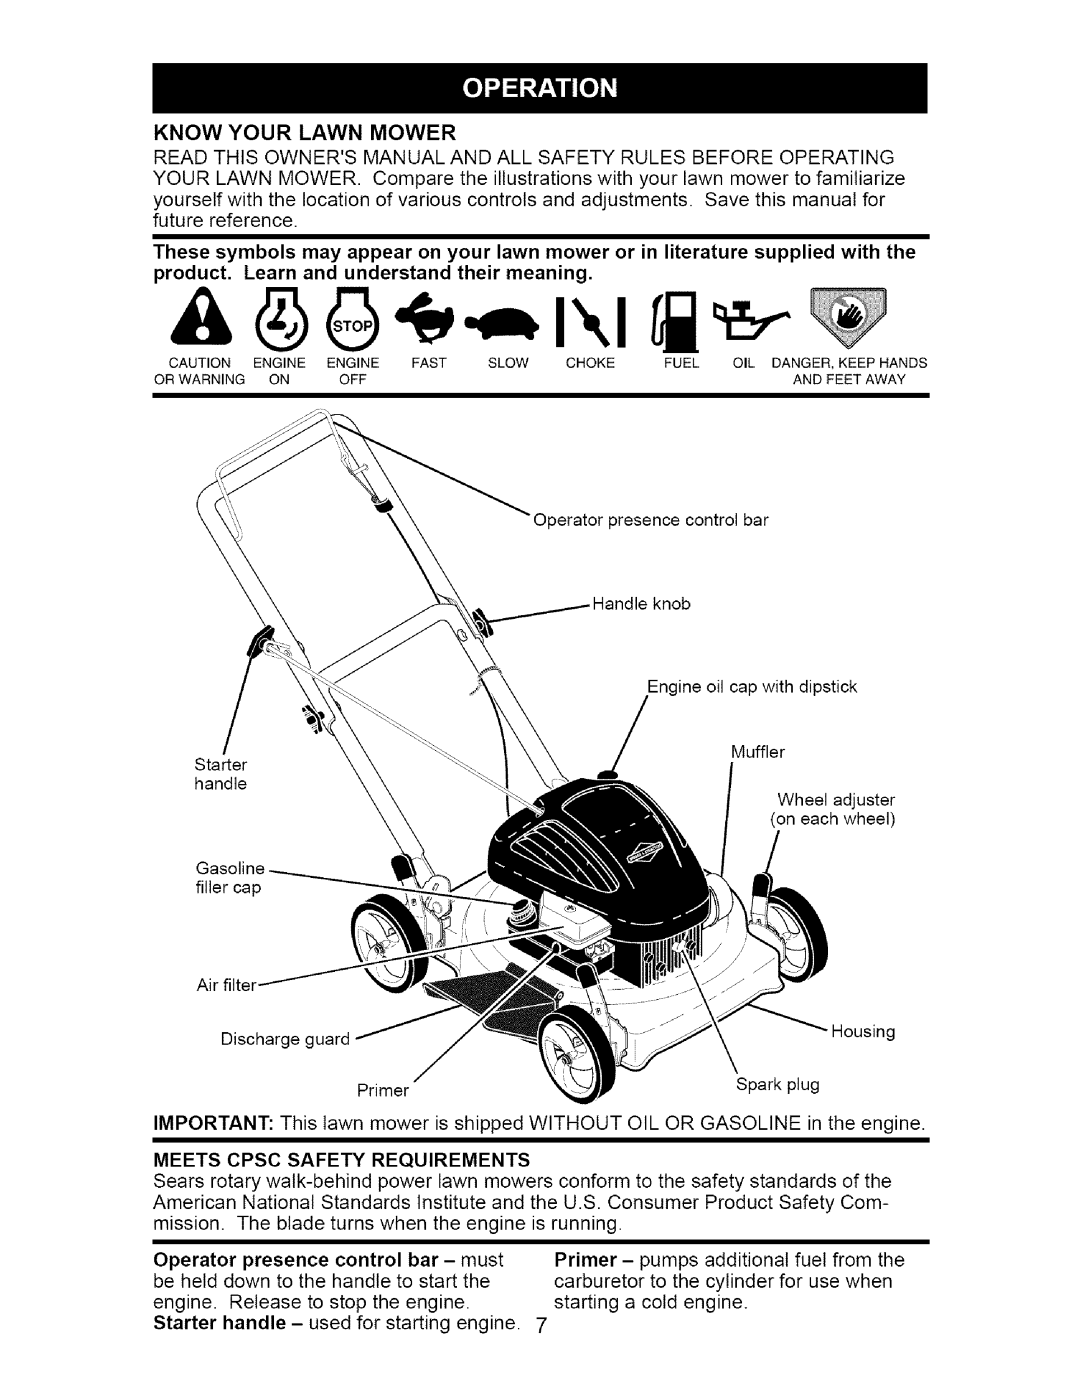 Craftsman 917.385124 Know Your Lawn Mower, product. Learn and understand their meaning, Meets Cpsc Safety Requirements 